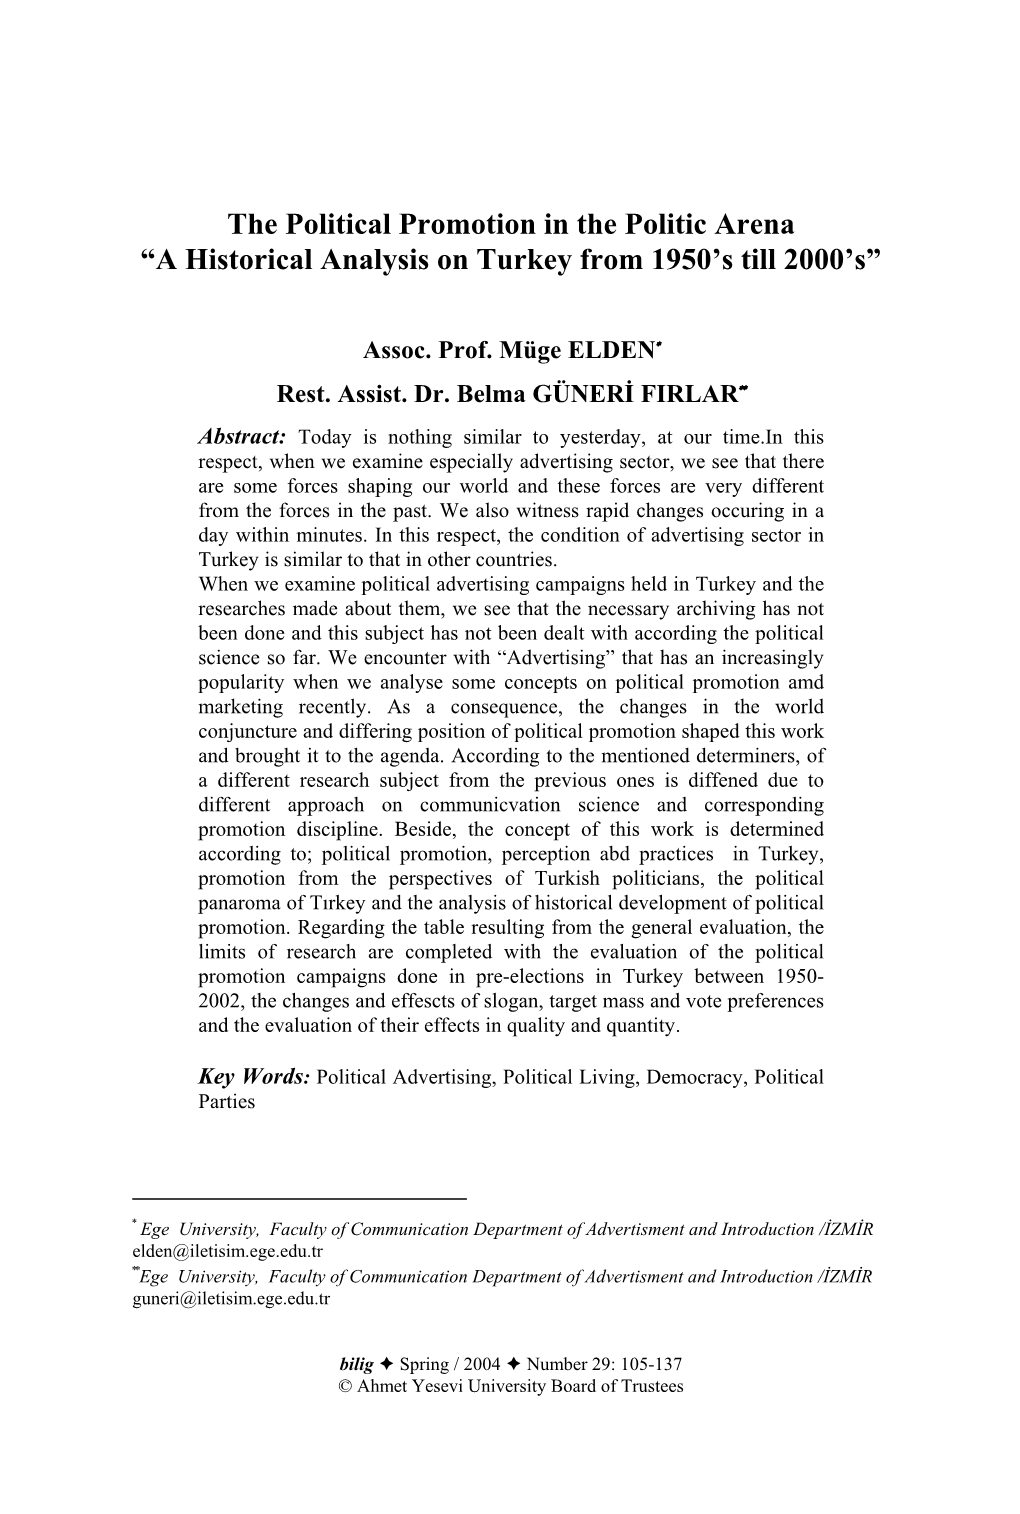 The Political Promotion in the Politic Arena “A Historical Analysis on Turkey from 1950’S Till 2000’S”